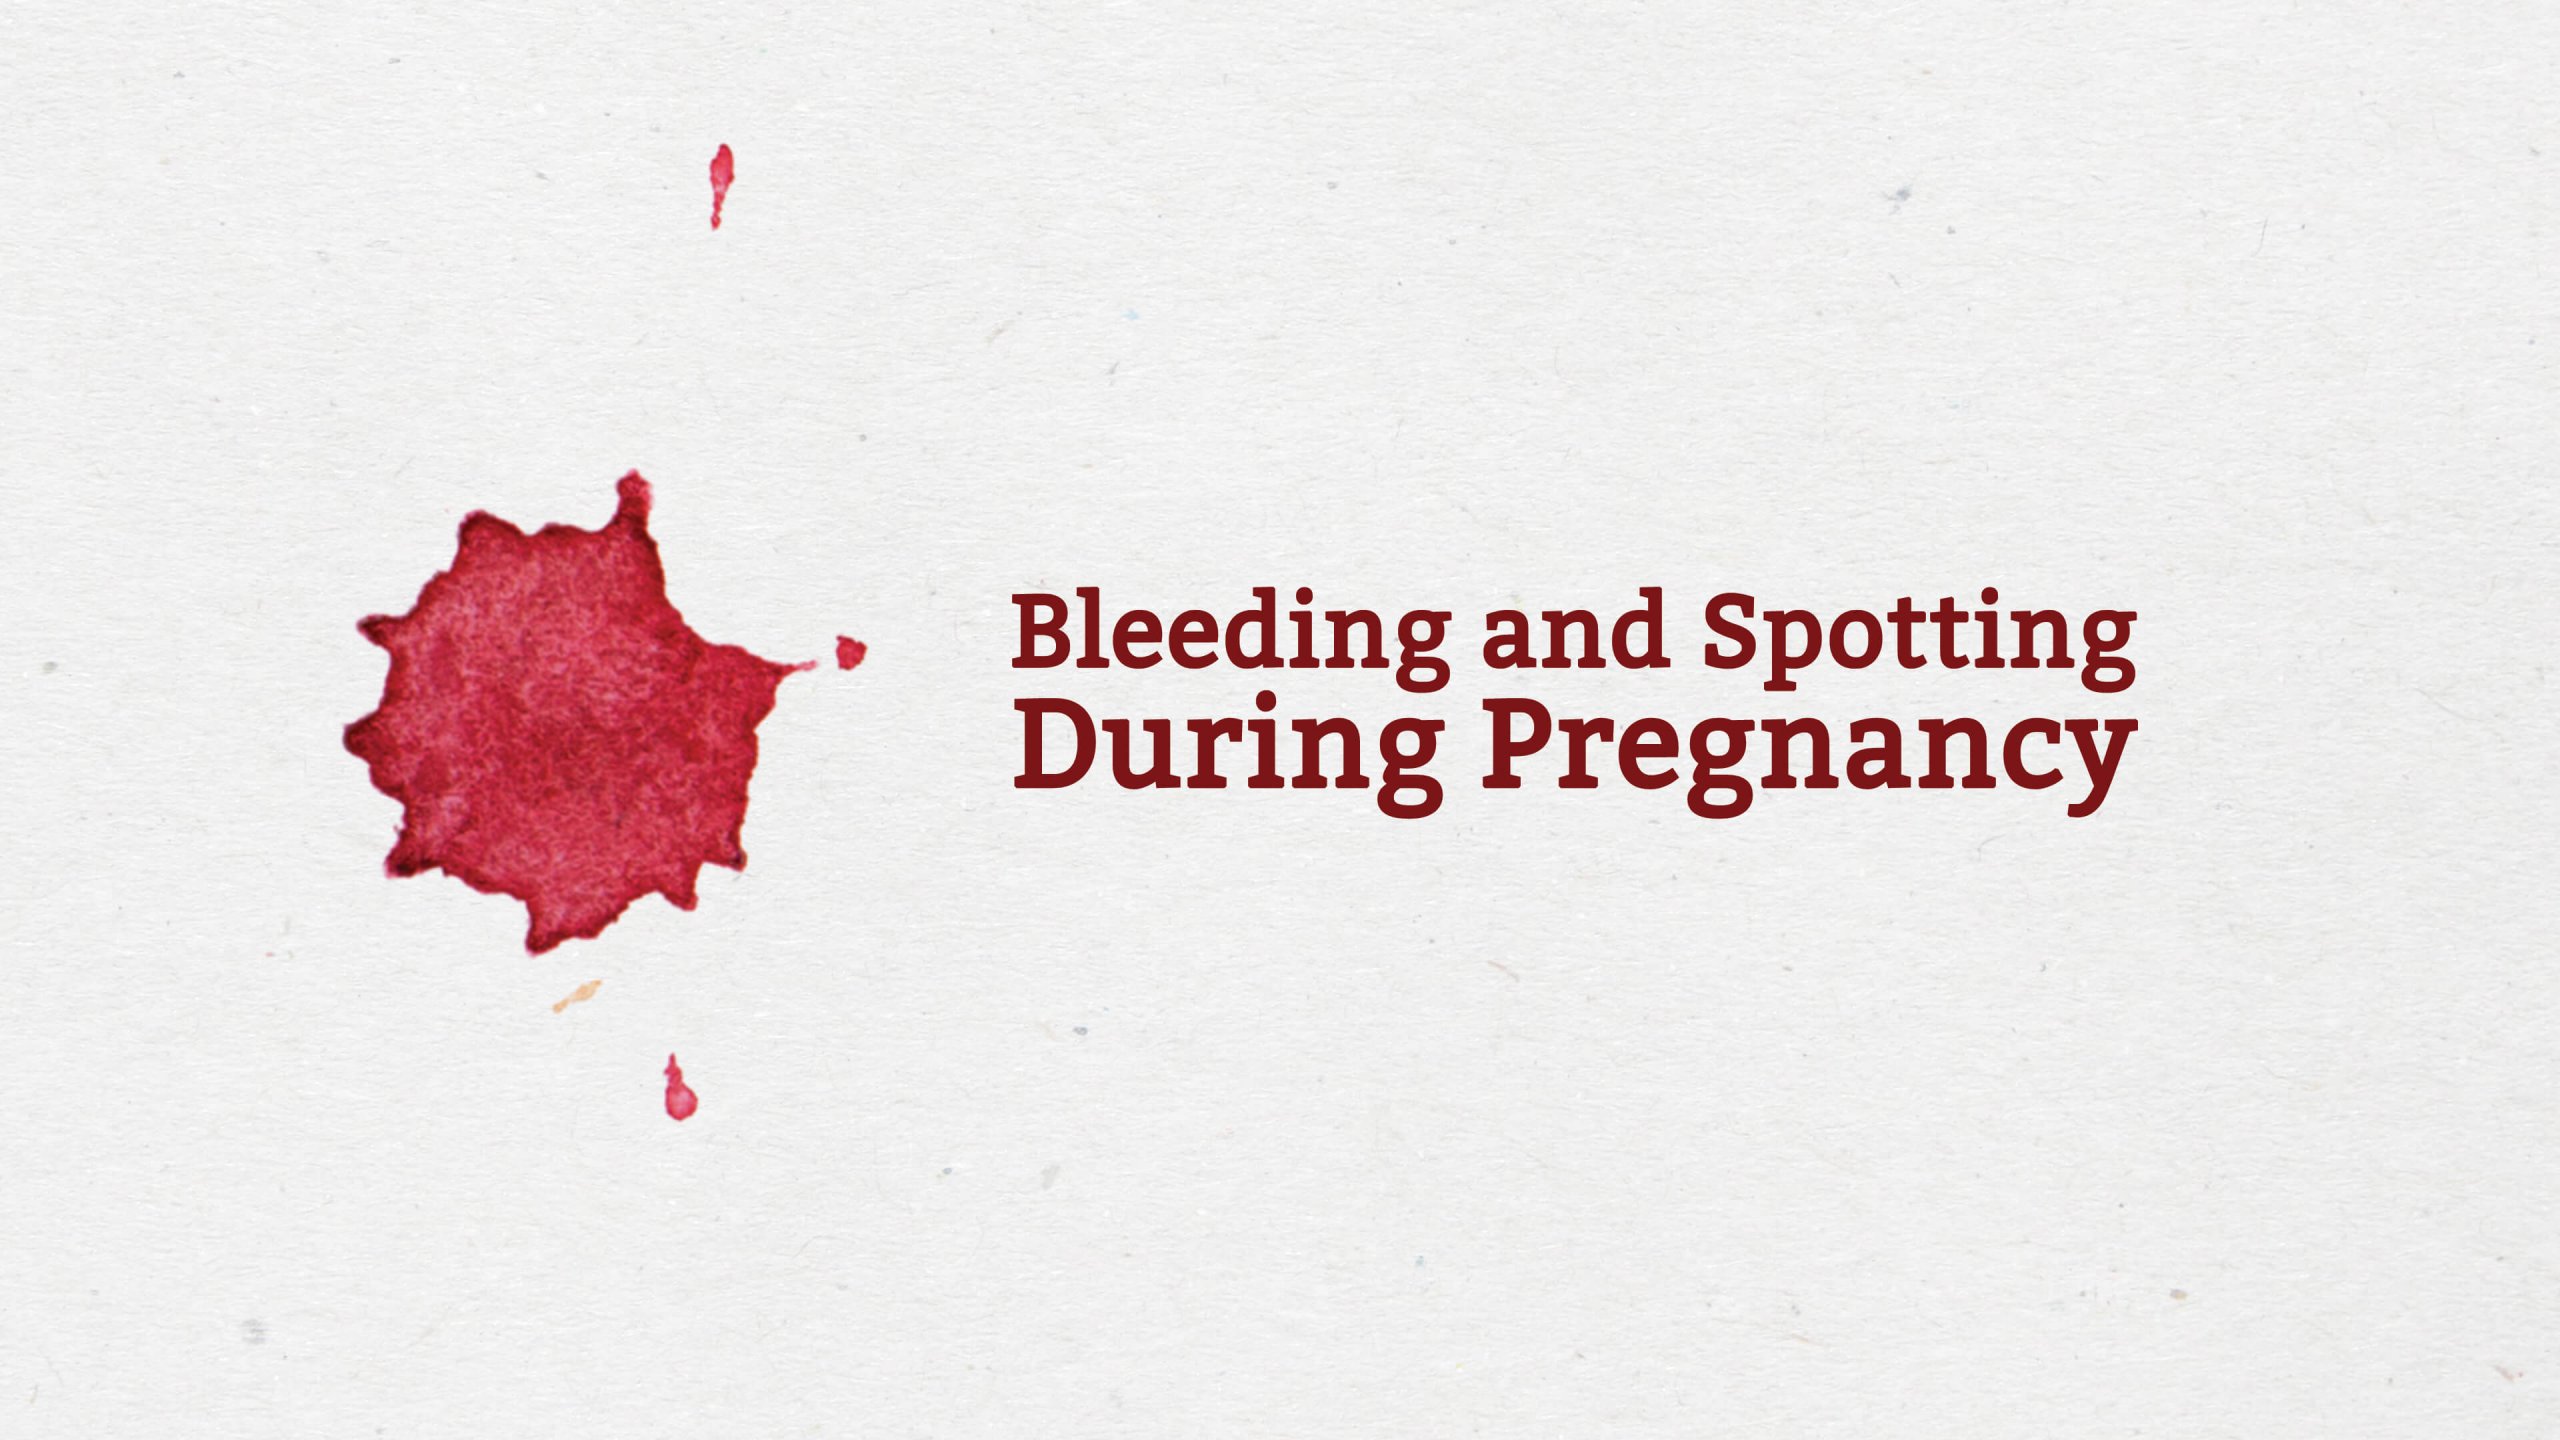 Worried about that brown discharge after your period? Keep calm